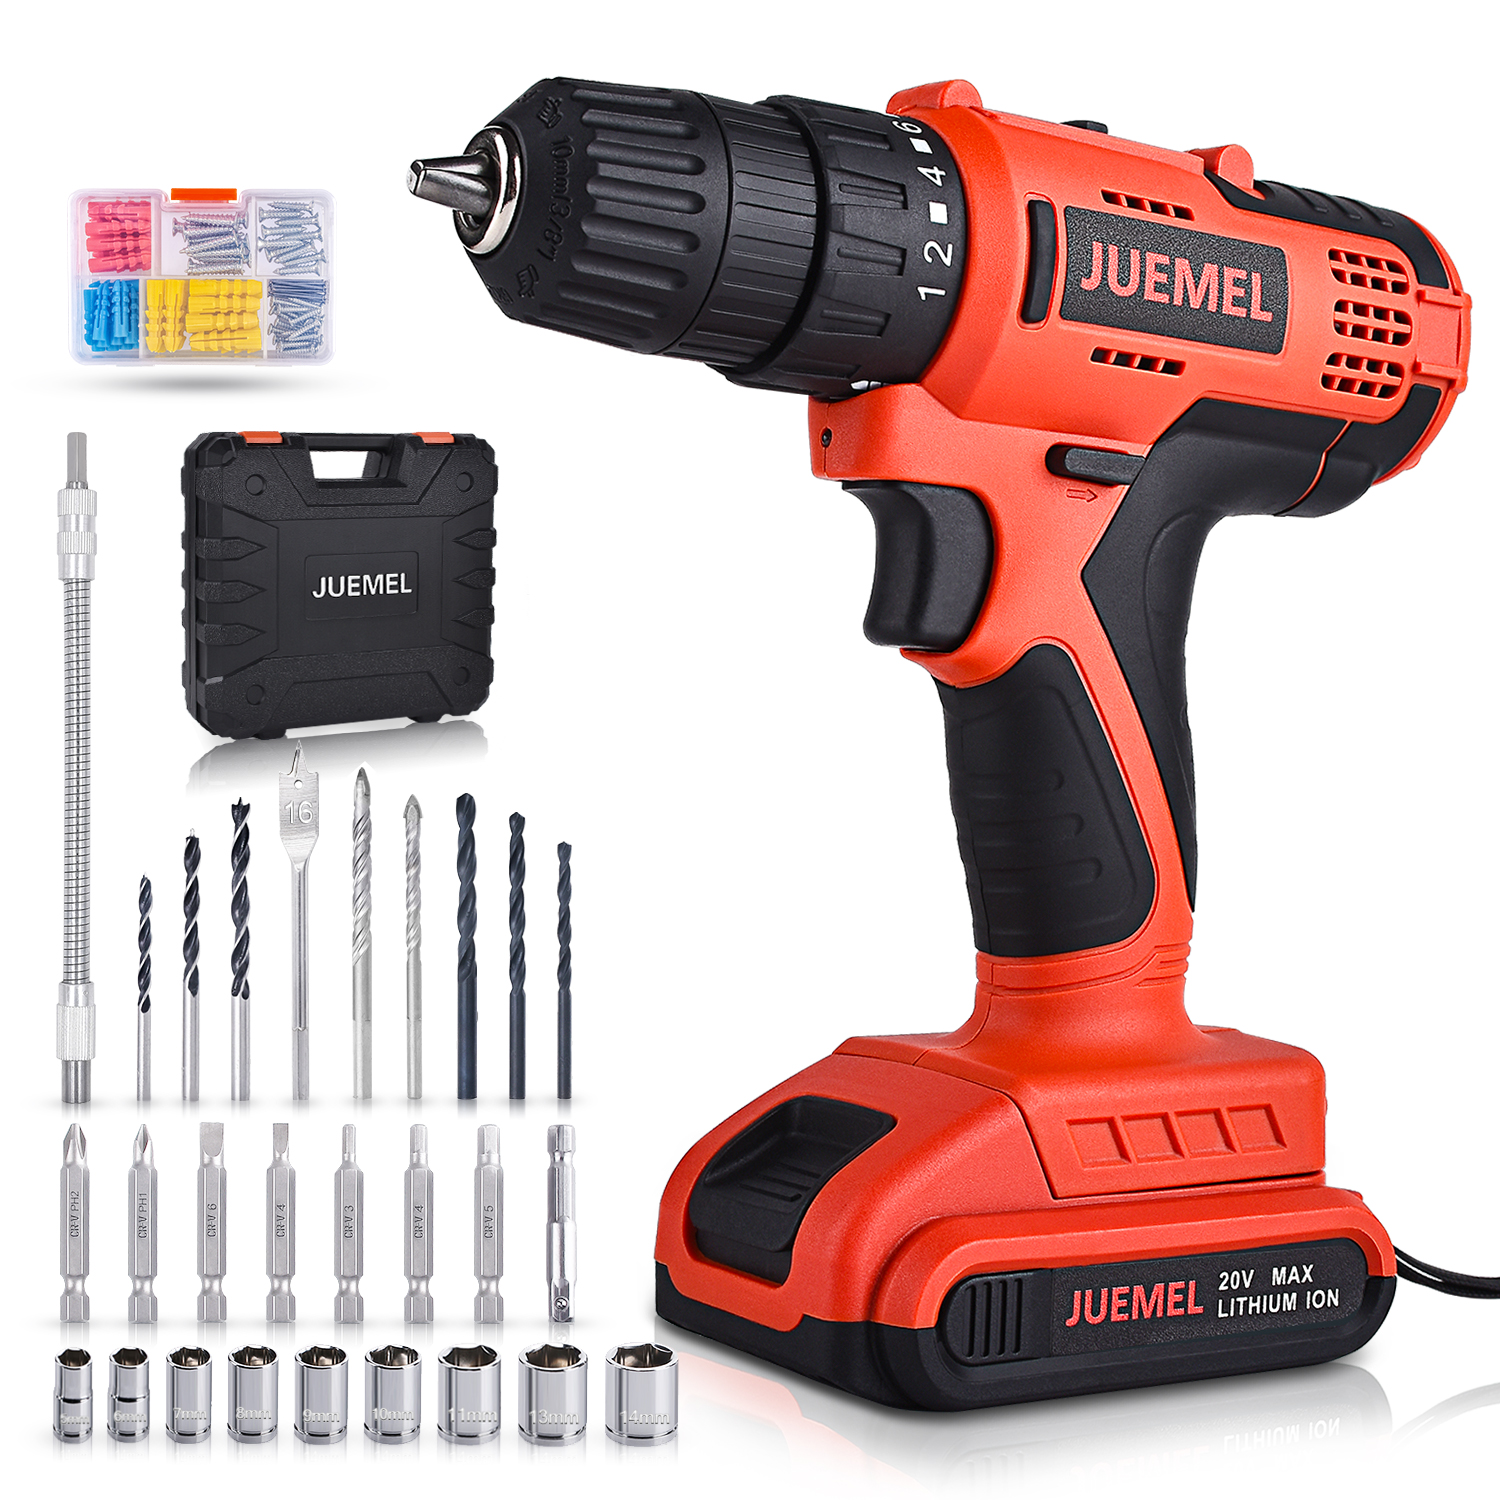 20V Cordless Drill Driver, JUEMEL 100 PCS Accessories Power Drill, Electric Screwdriver Set (1 Battery 2000mAh / 1H Fast Charger/Max Torque 36Nm / 2 Variable Speed / 3/8 inch Chuck) for DIY Project